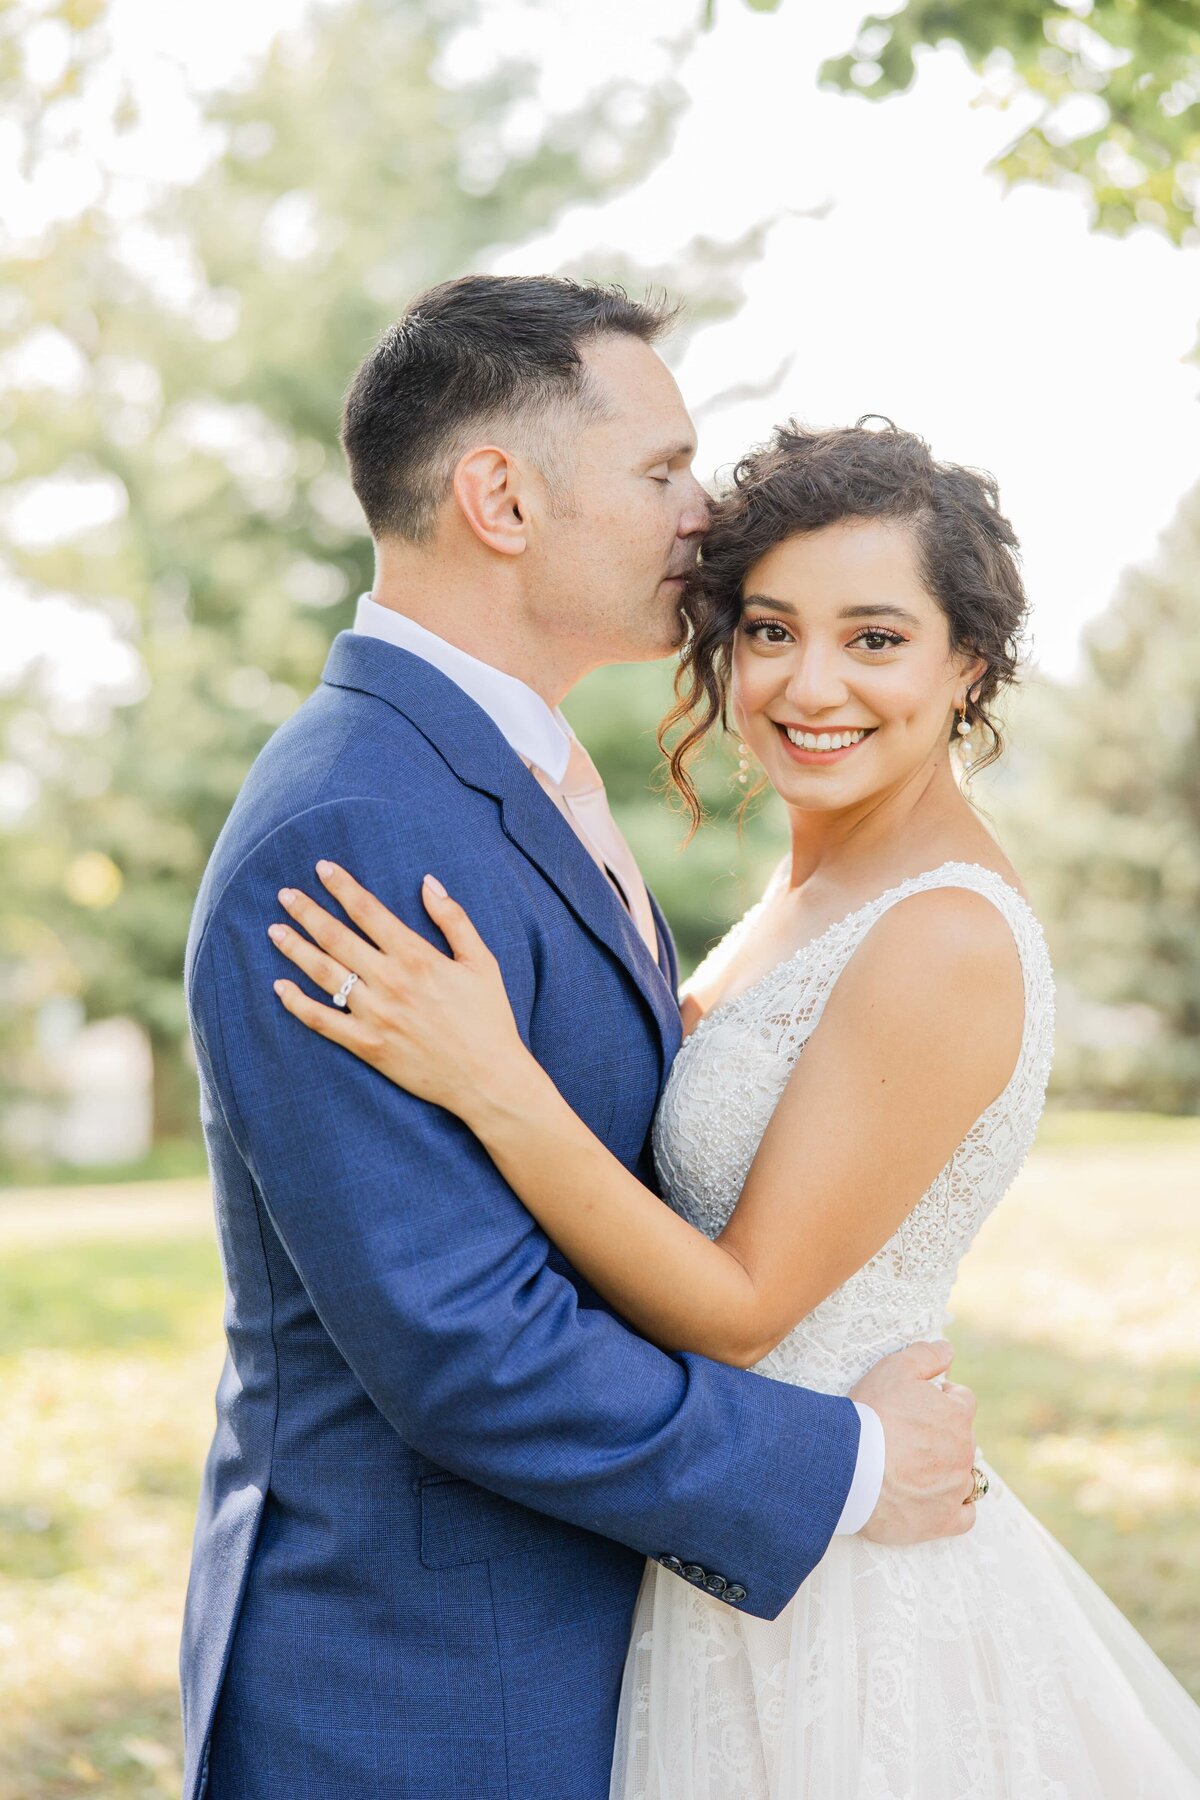 A bride and groom smiling and embracing outdoors in Iowa, the groom kissing the bride's forehead in a sunny park setting.